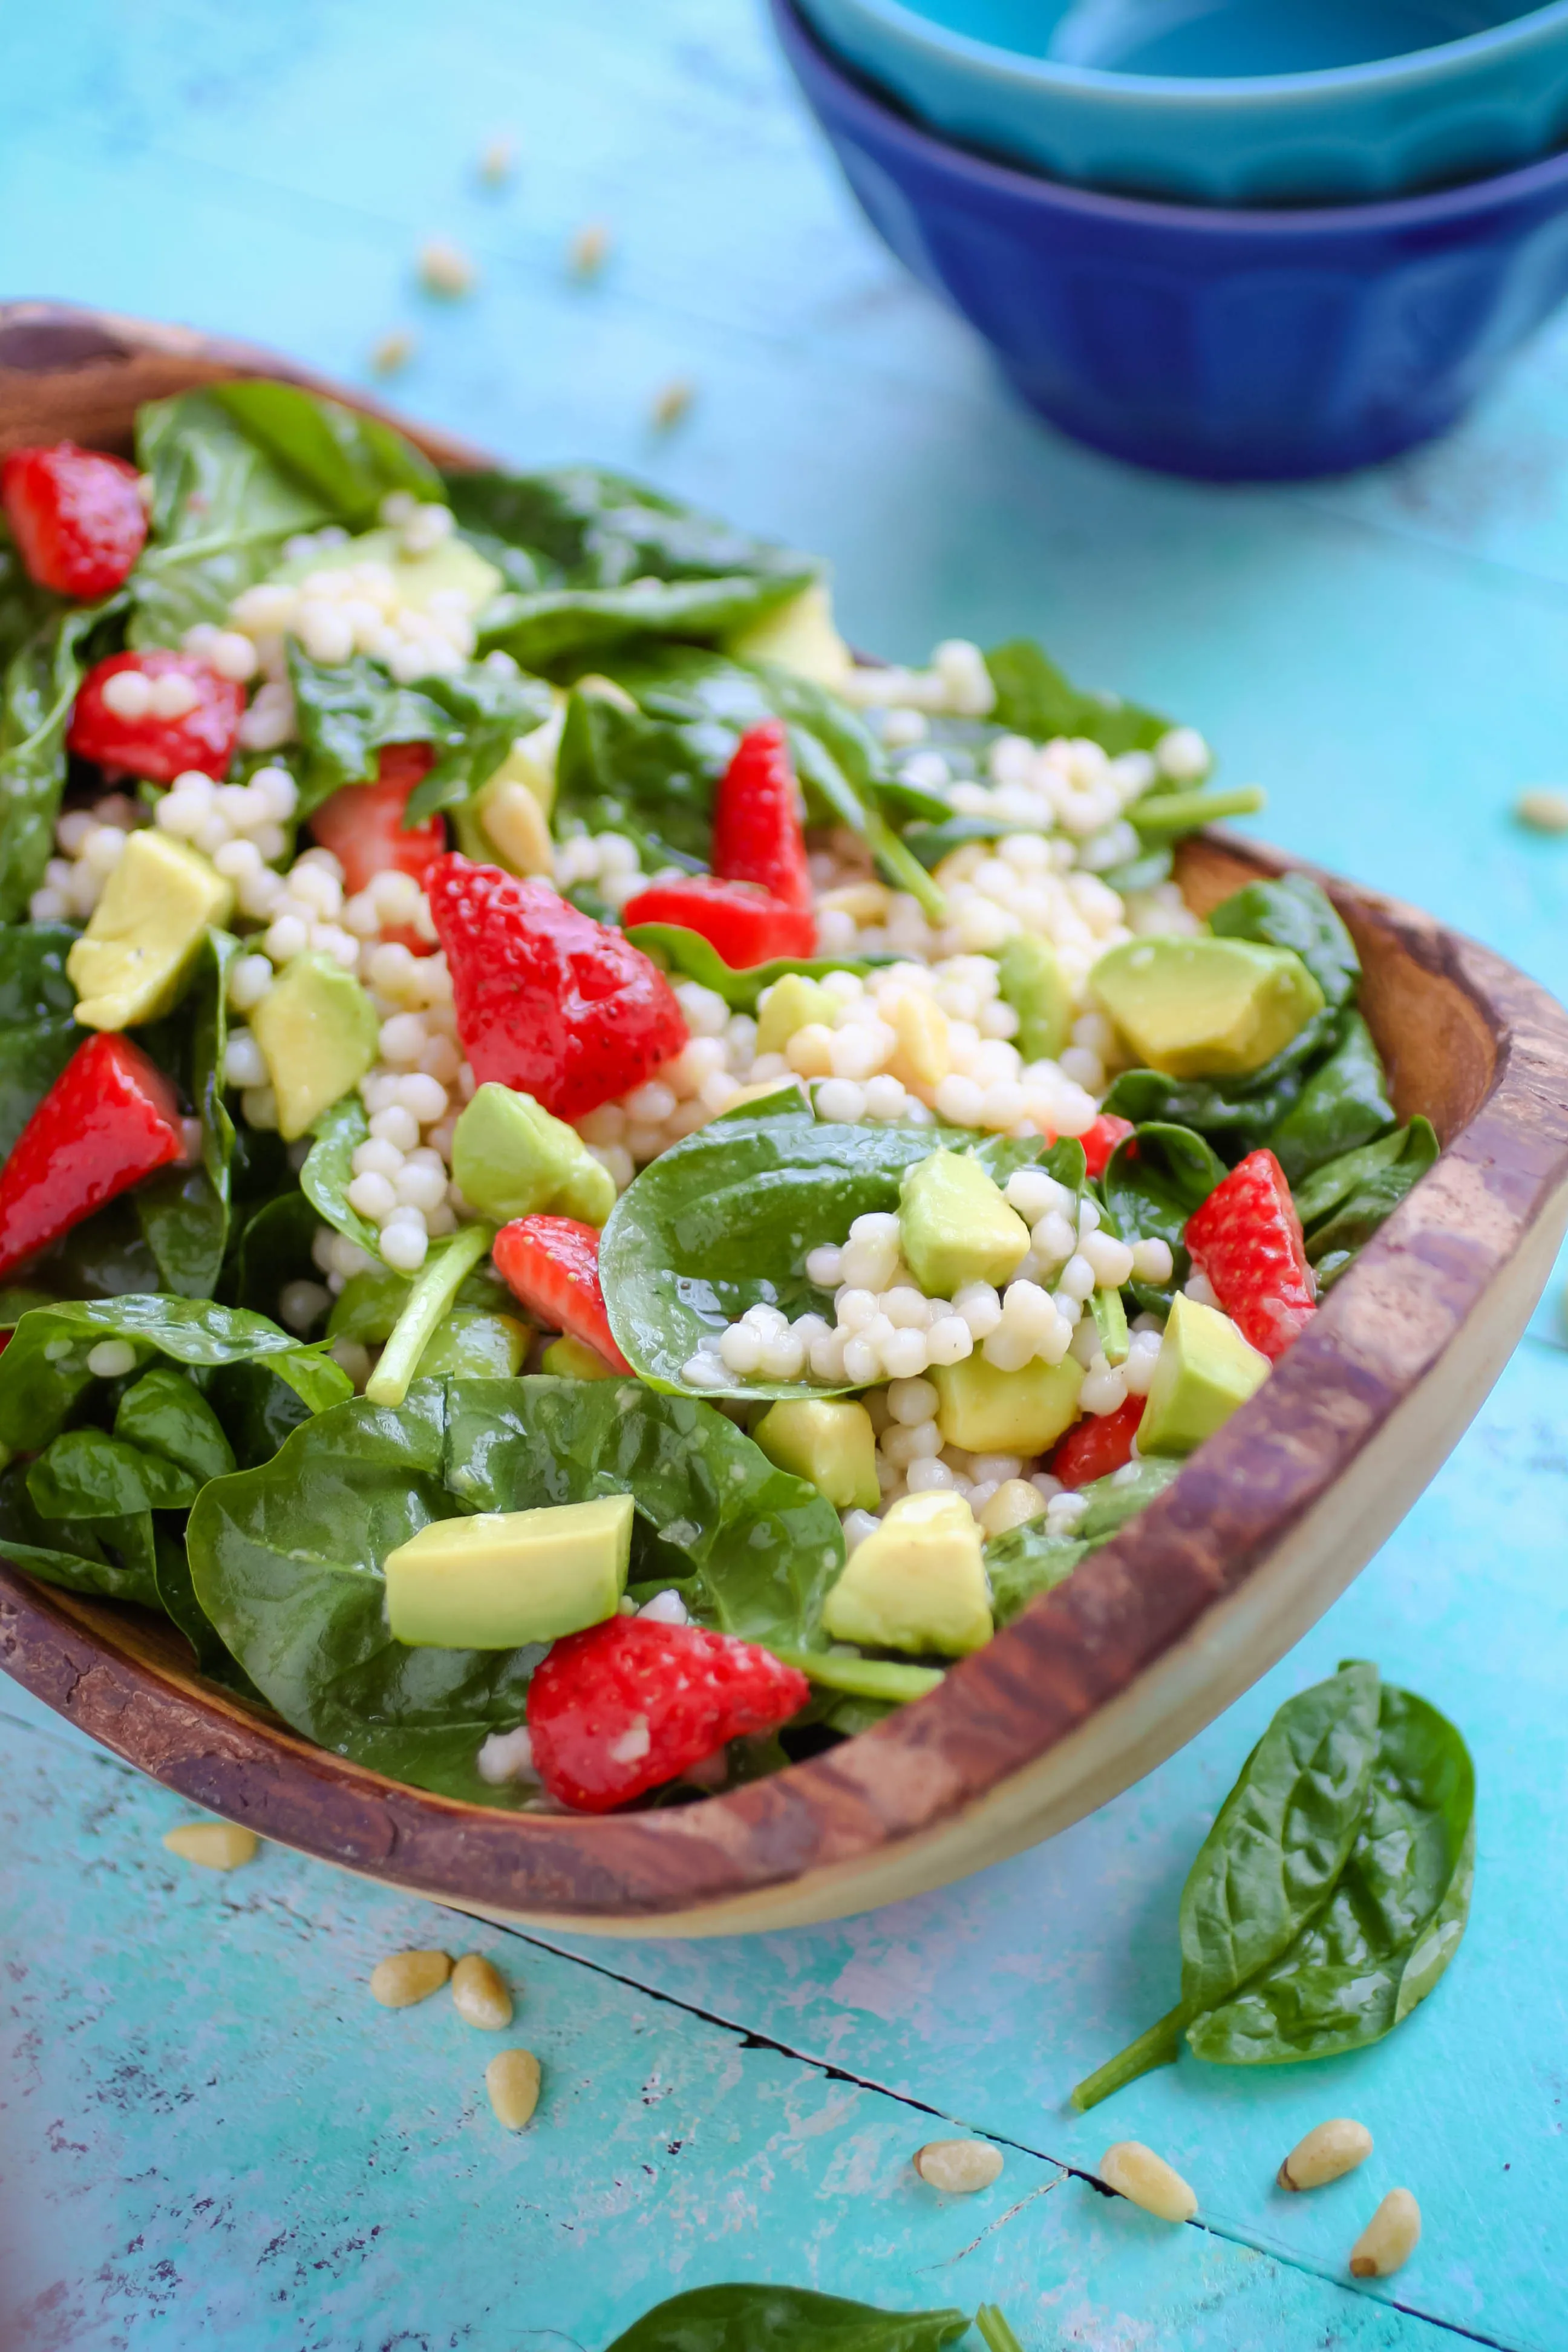 Spinach and Couscous Salad with Strawberries, Avocado & Honey-Lime Dressing is a fabulous salad for the season. Everyone will love Spinach and Couscous Salad with Strawberries, Avocado & Honey-Lime Dressing. 